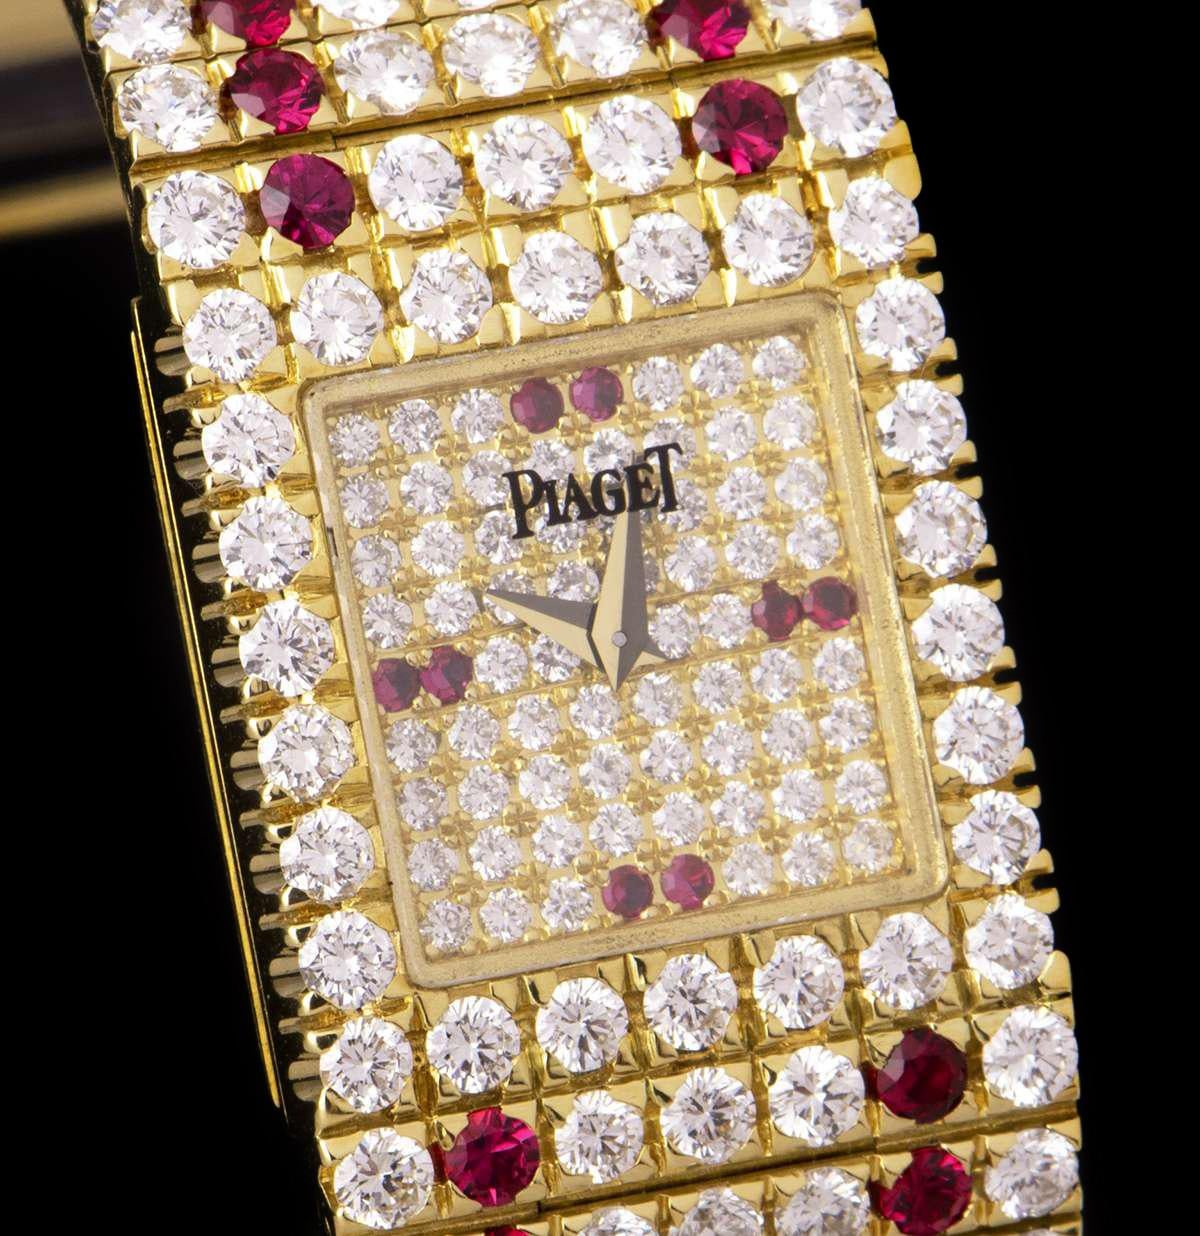 An 18k Yellow Gold Fully Loaded Vintage Ladies Wristwatch, pave diamond dial set with 2 round brilliant cut rubies at 3, 6, 9 and 12 0'clock, a fixed 18k yellow gold bezel set with 26 round brilliant cut diamonds, an 18k yellow gold jewellery style